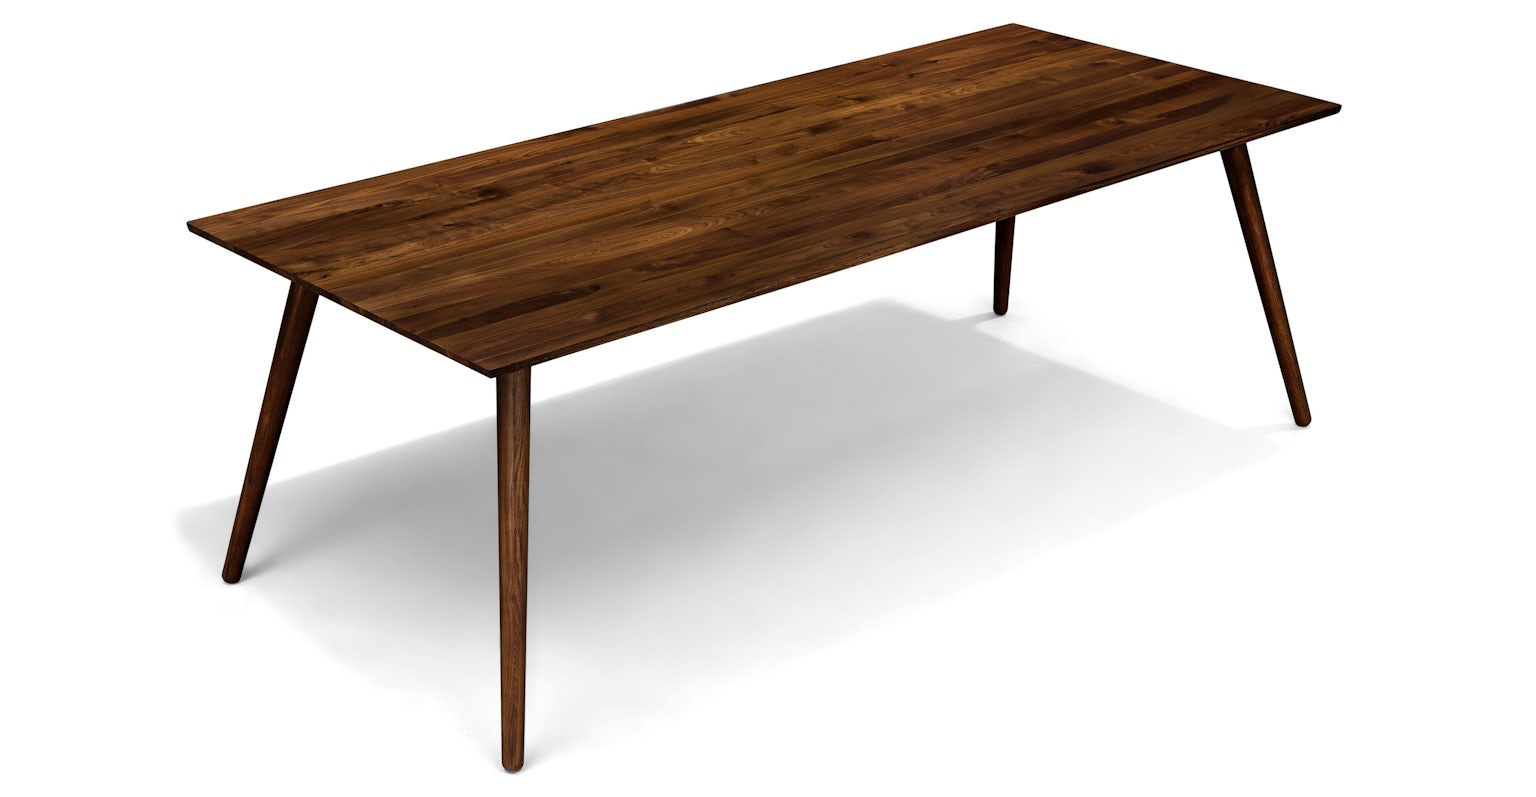 Seno Walnut Dining Table for 8 People | Article